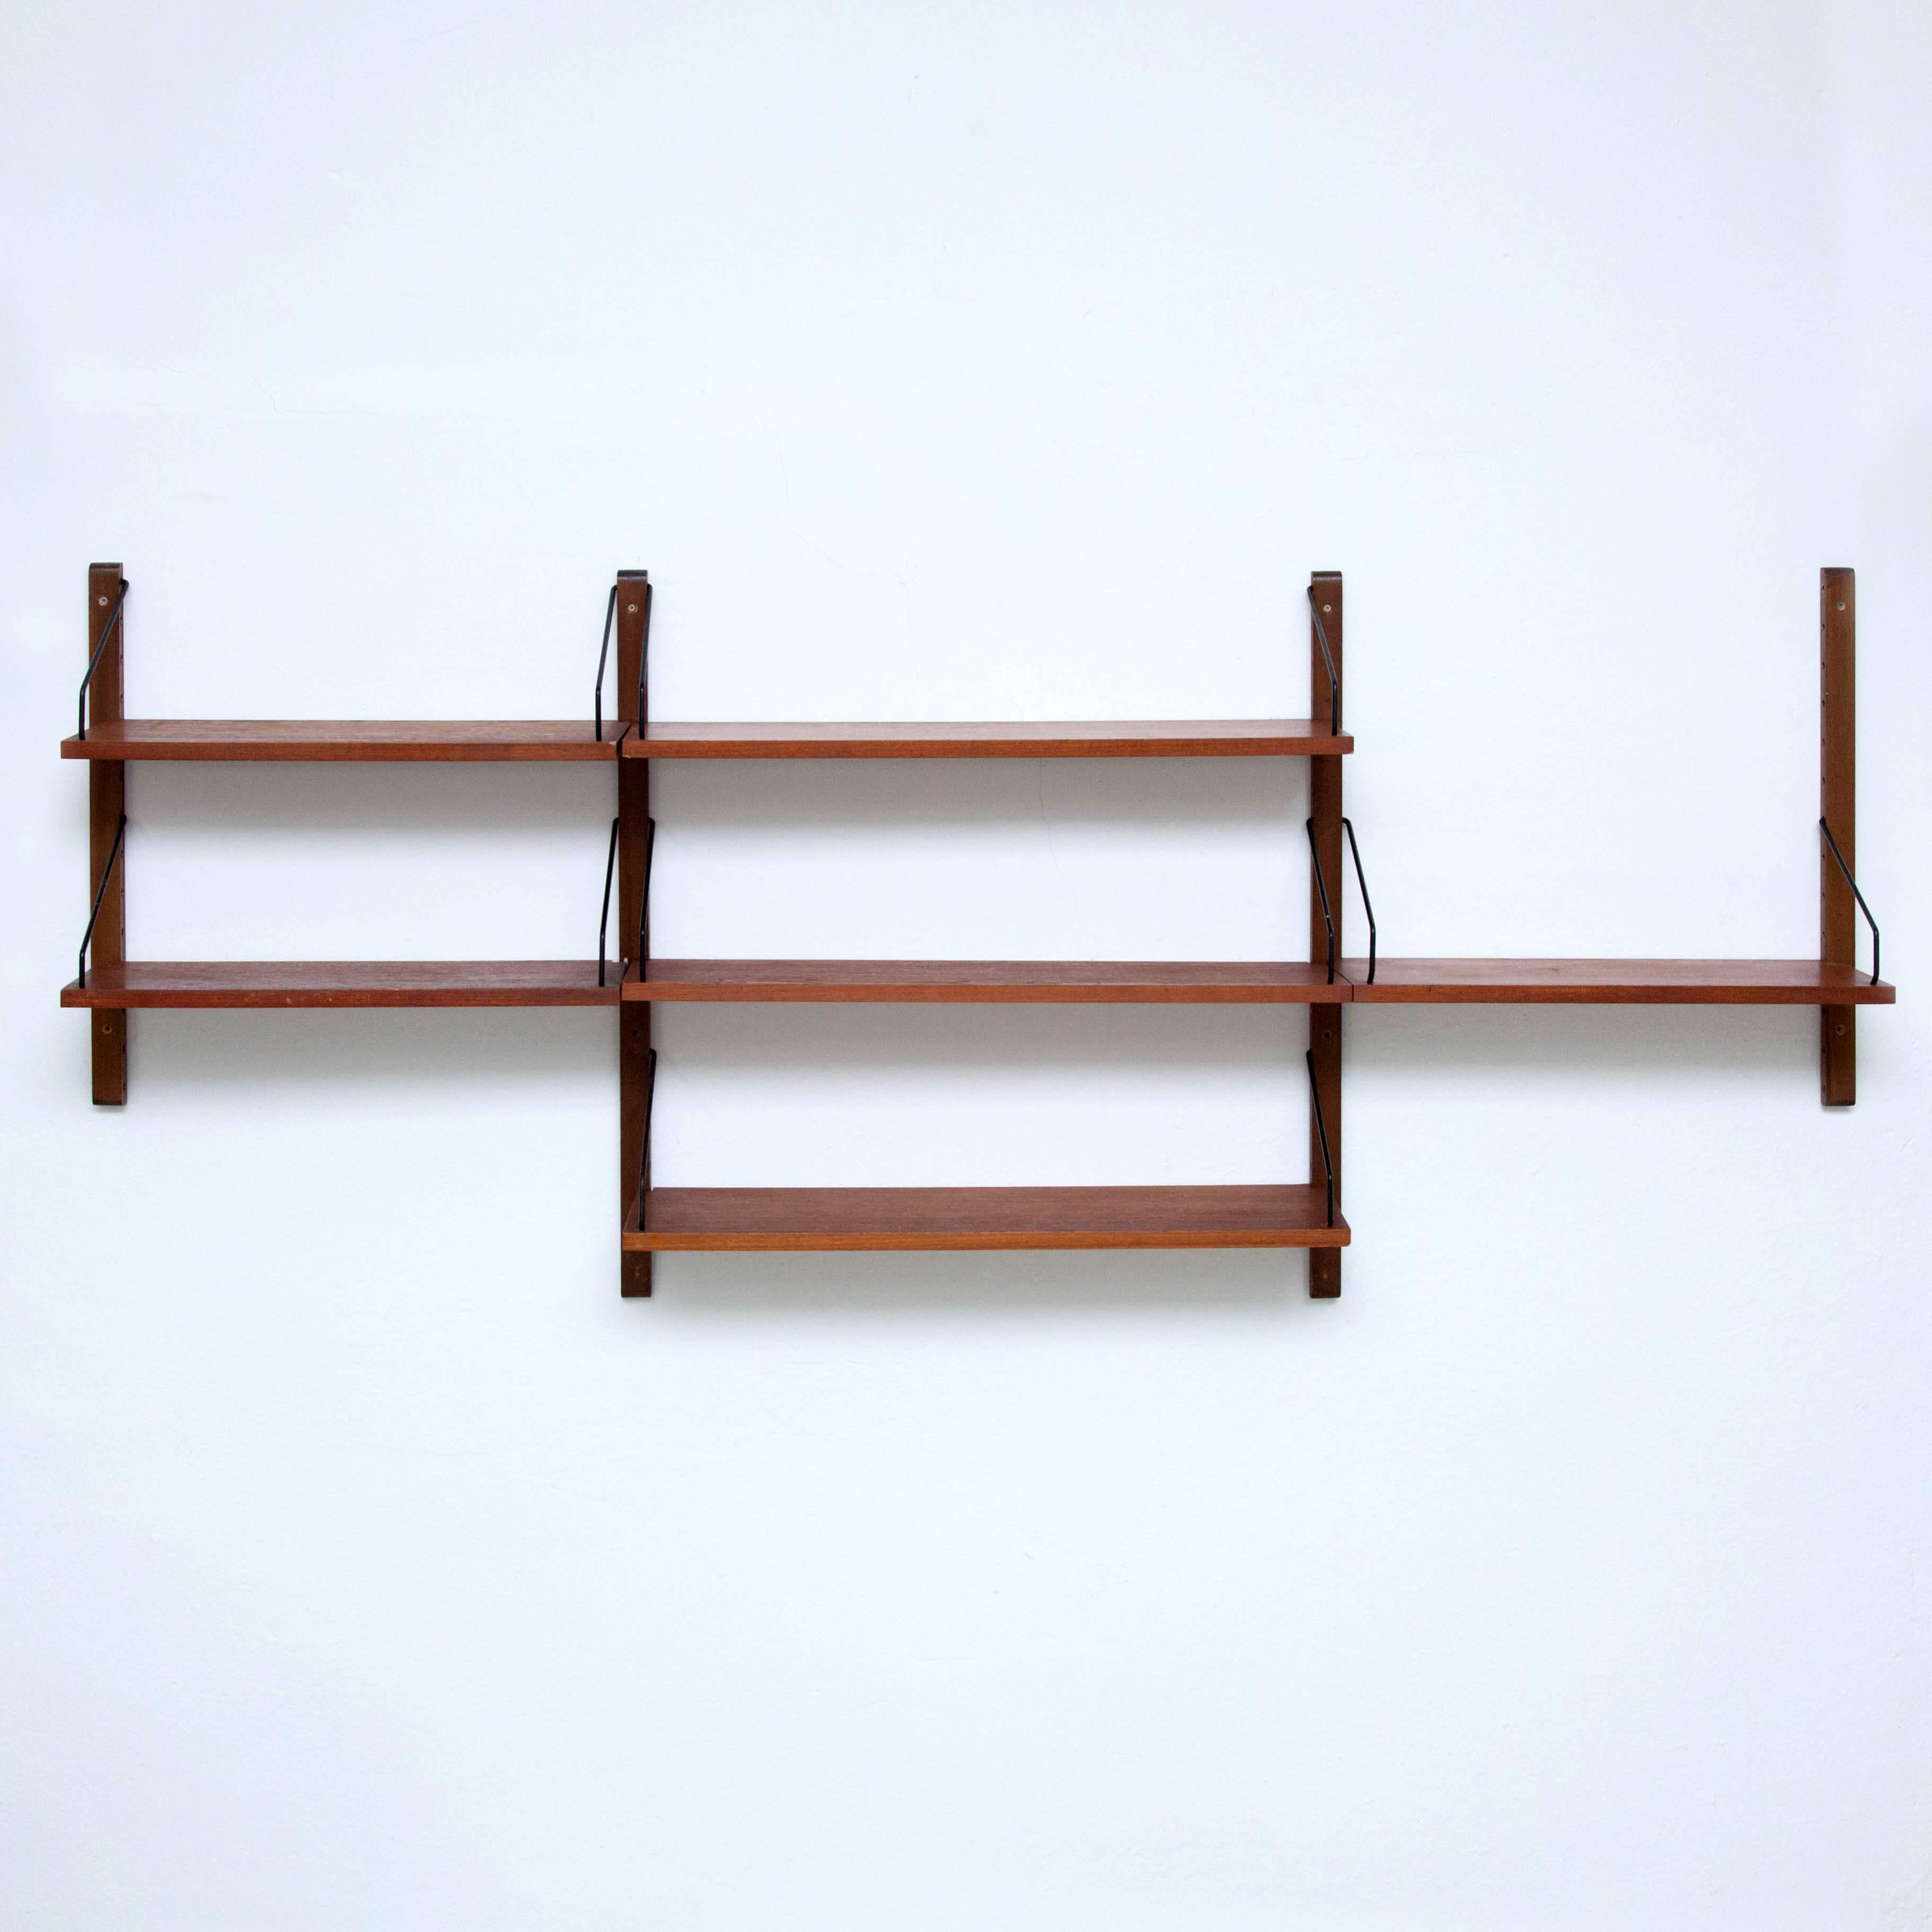 'Royal System' wall shelves system designed by Poul Cadovius, 1948.
Manufactured by CADO in Denmark.

It possible to fit multiple shelves together.

In good original condition with minor wear consistent with age and use, preserving a beautiful